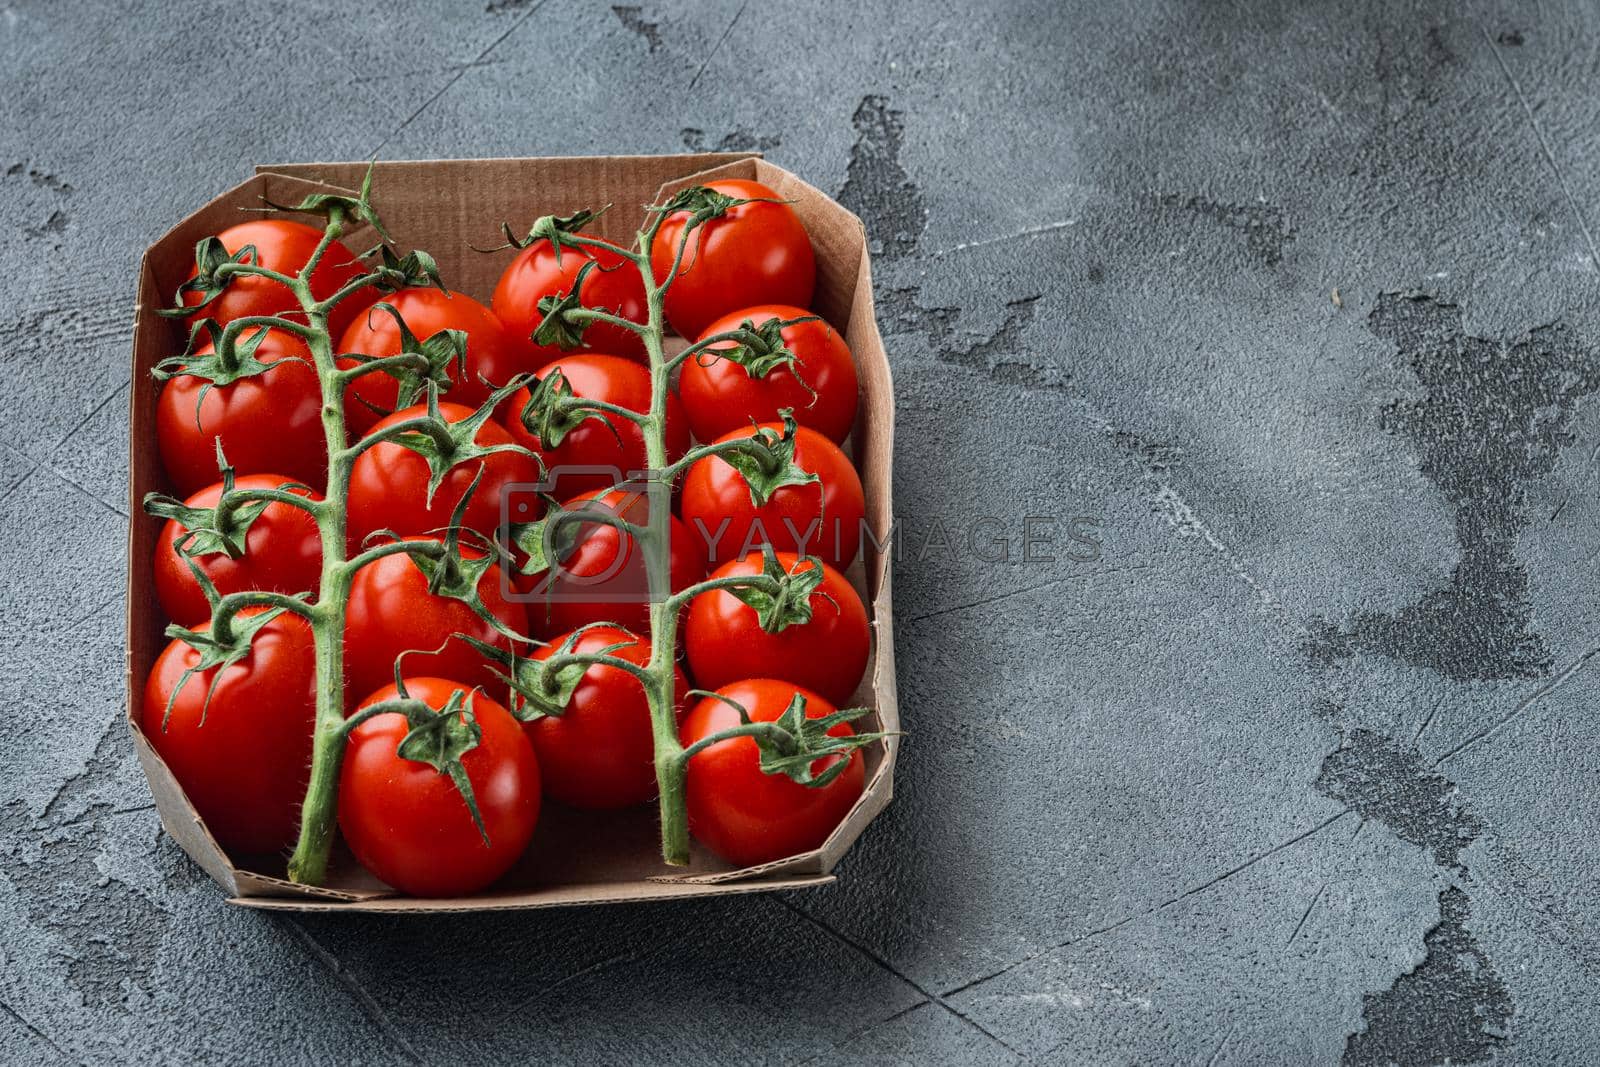 Royalty free image of Ripe cherry tomatoe in tray, on gray background with copy space for text by Ilianesolenyi